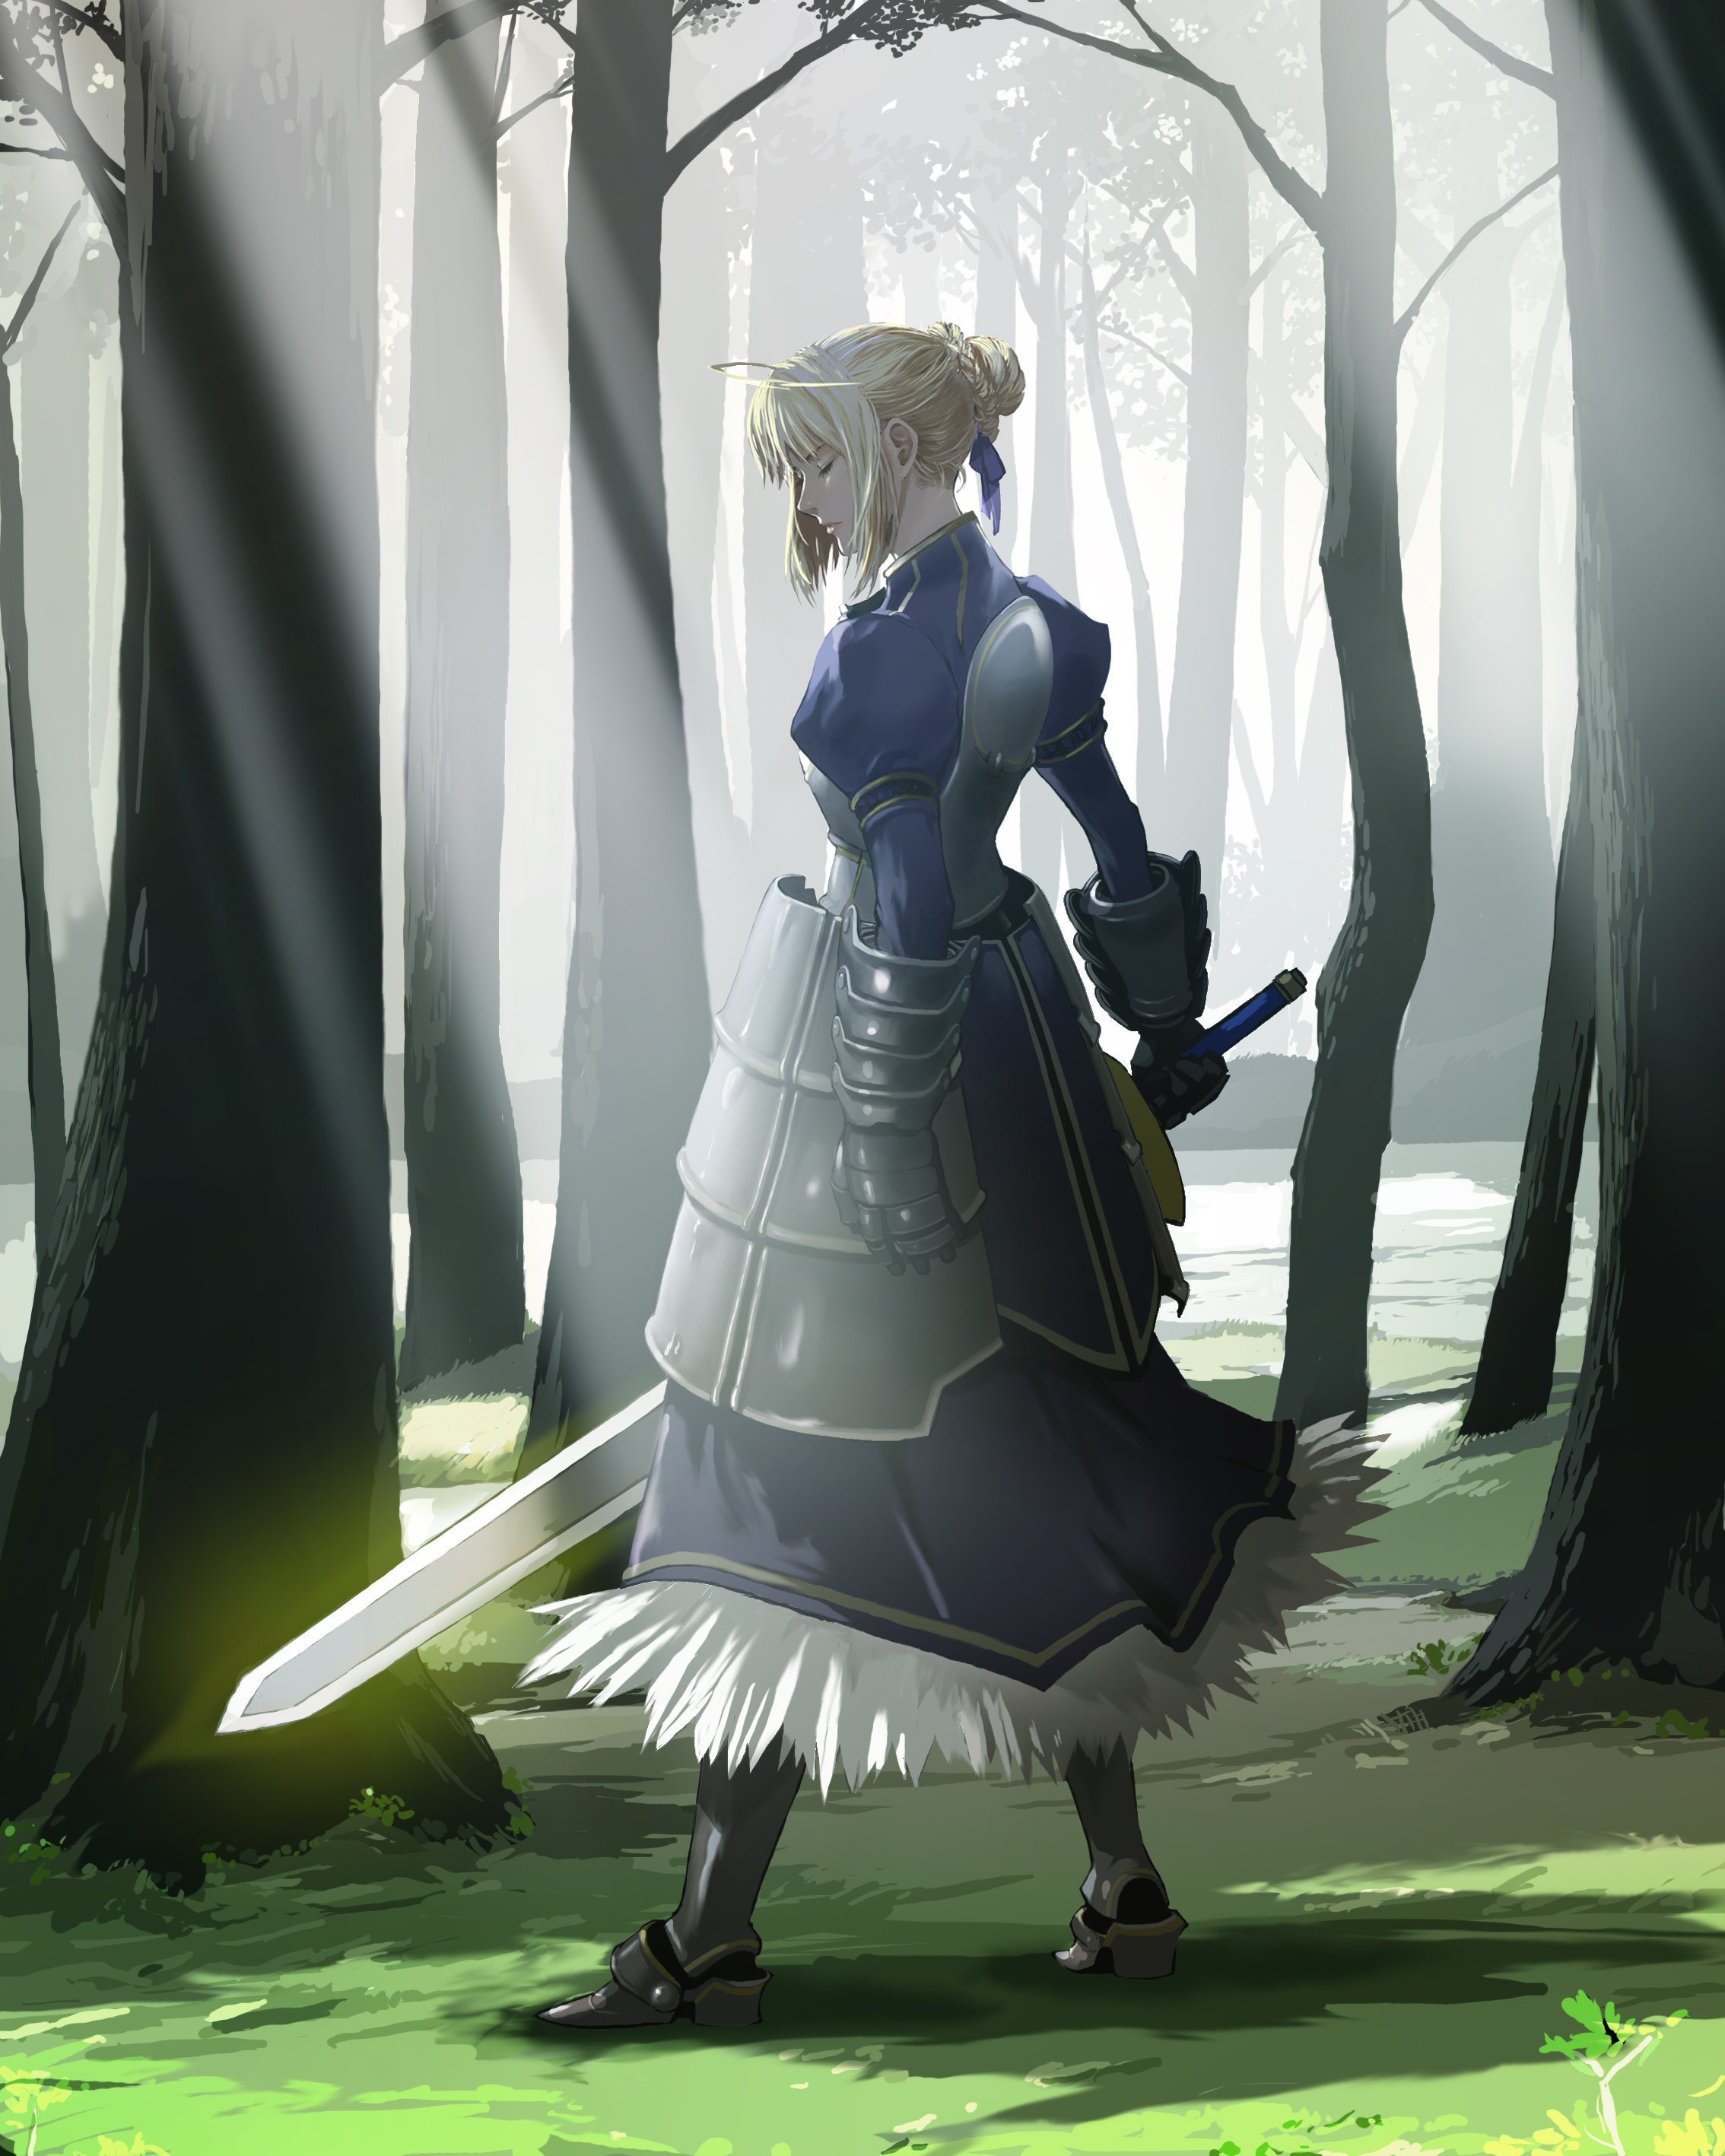 Anime 2268x2835 Fate/Stay Night Fate series anime girls Saber